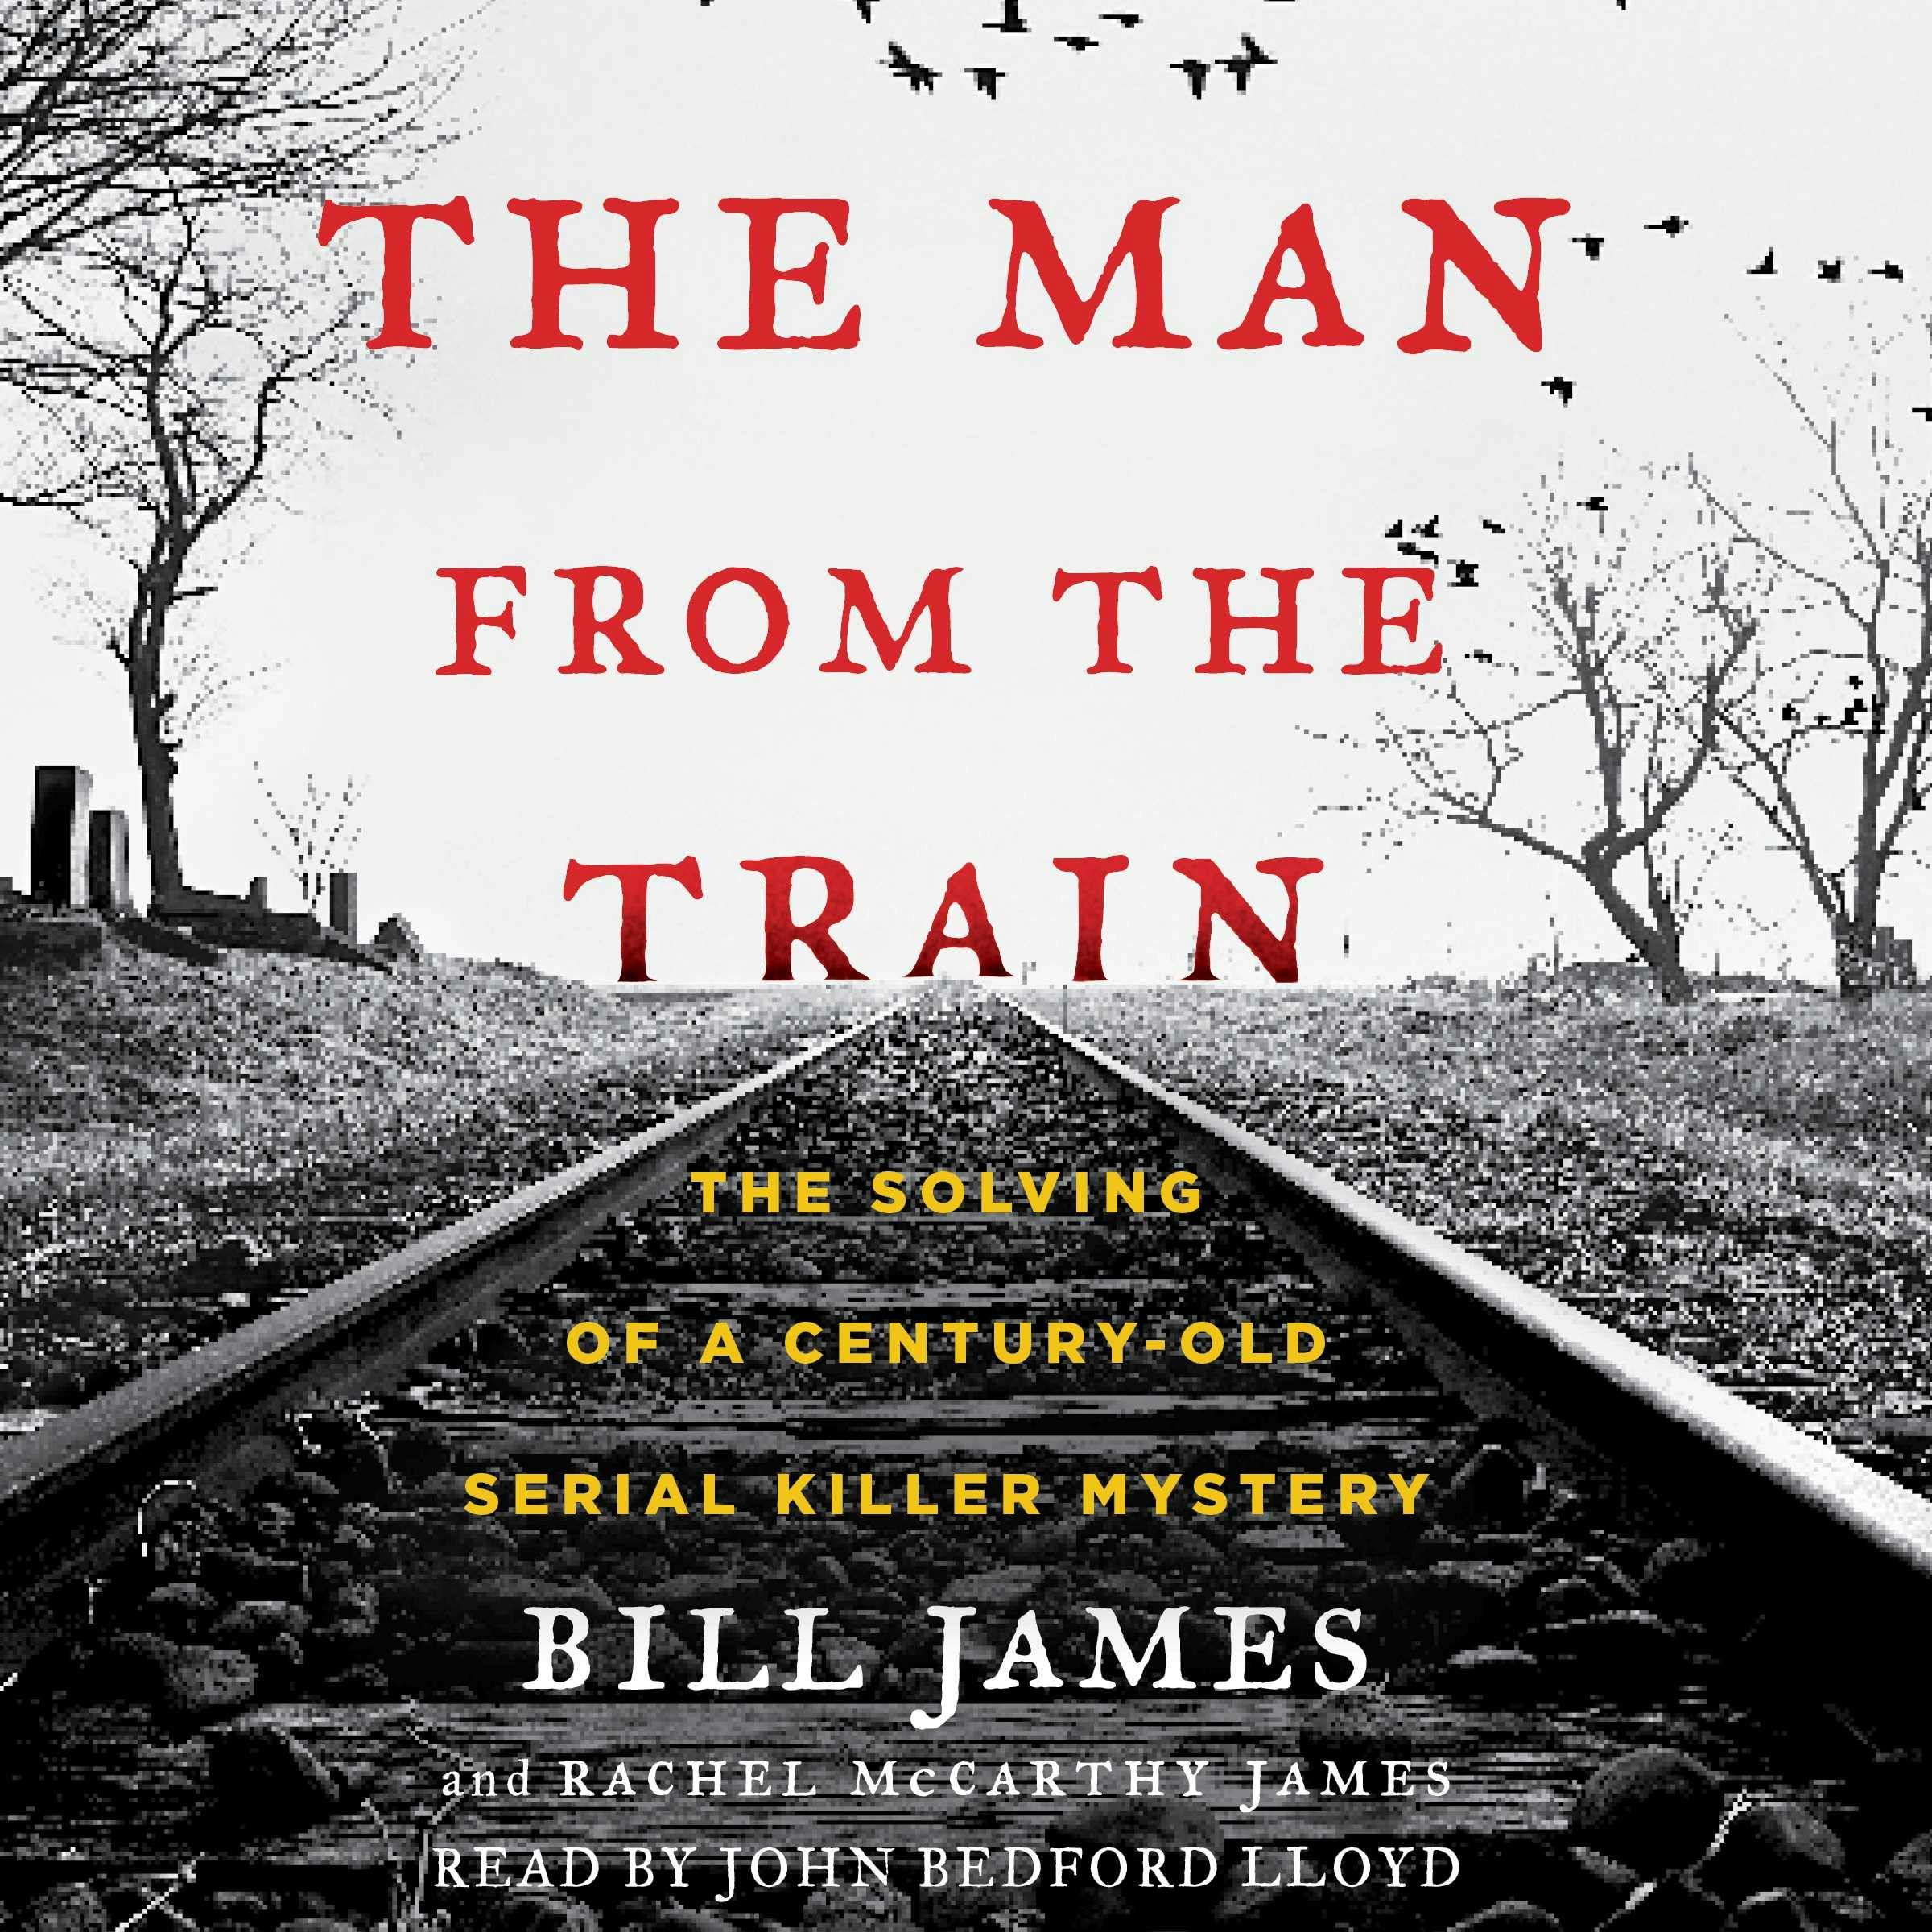 The Man from the Train: The Solving of a Century-Old Serial Killer Mystery - Bill James, Rachel McCarthy James